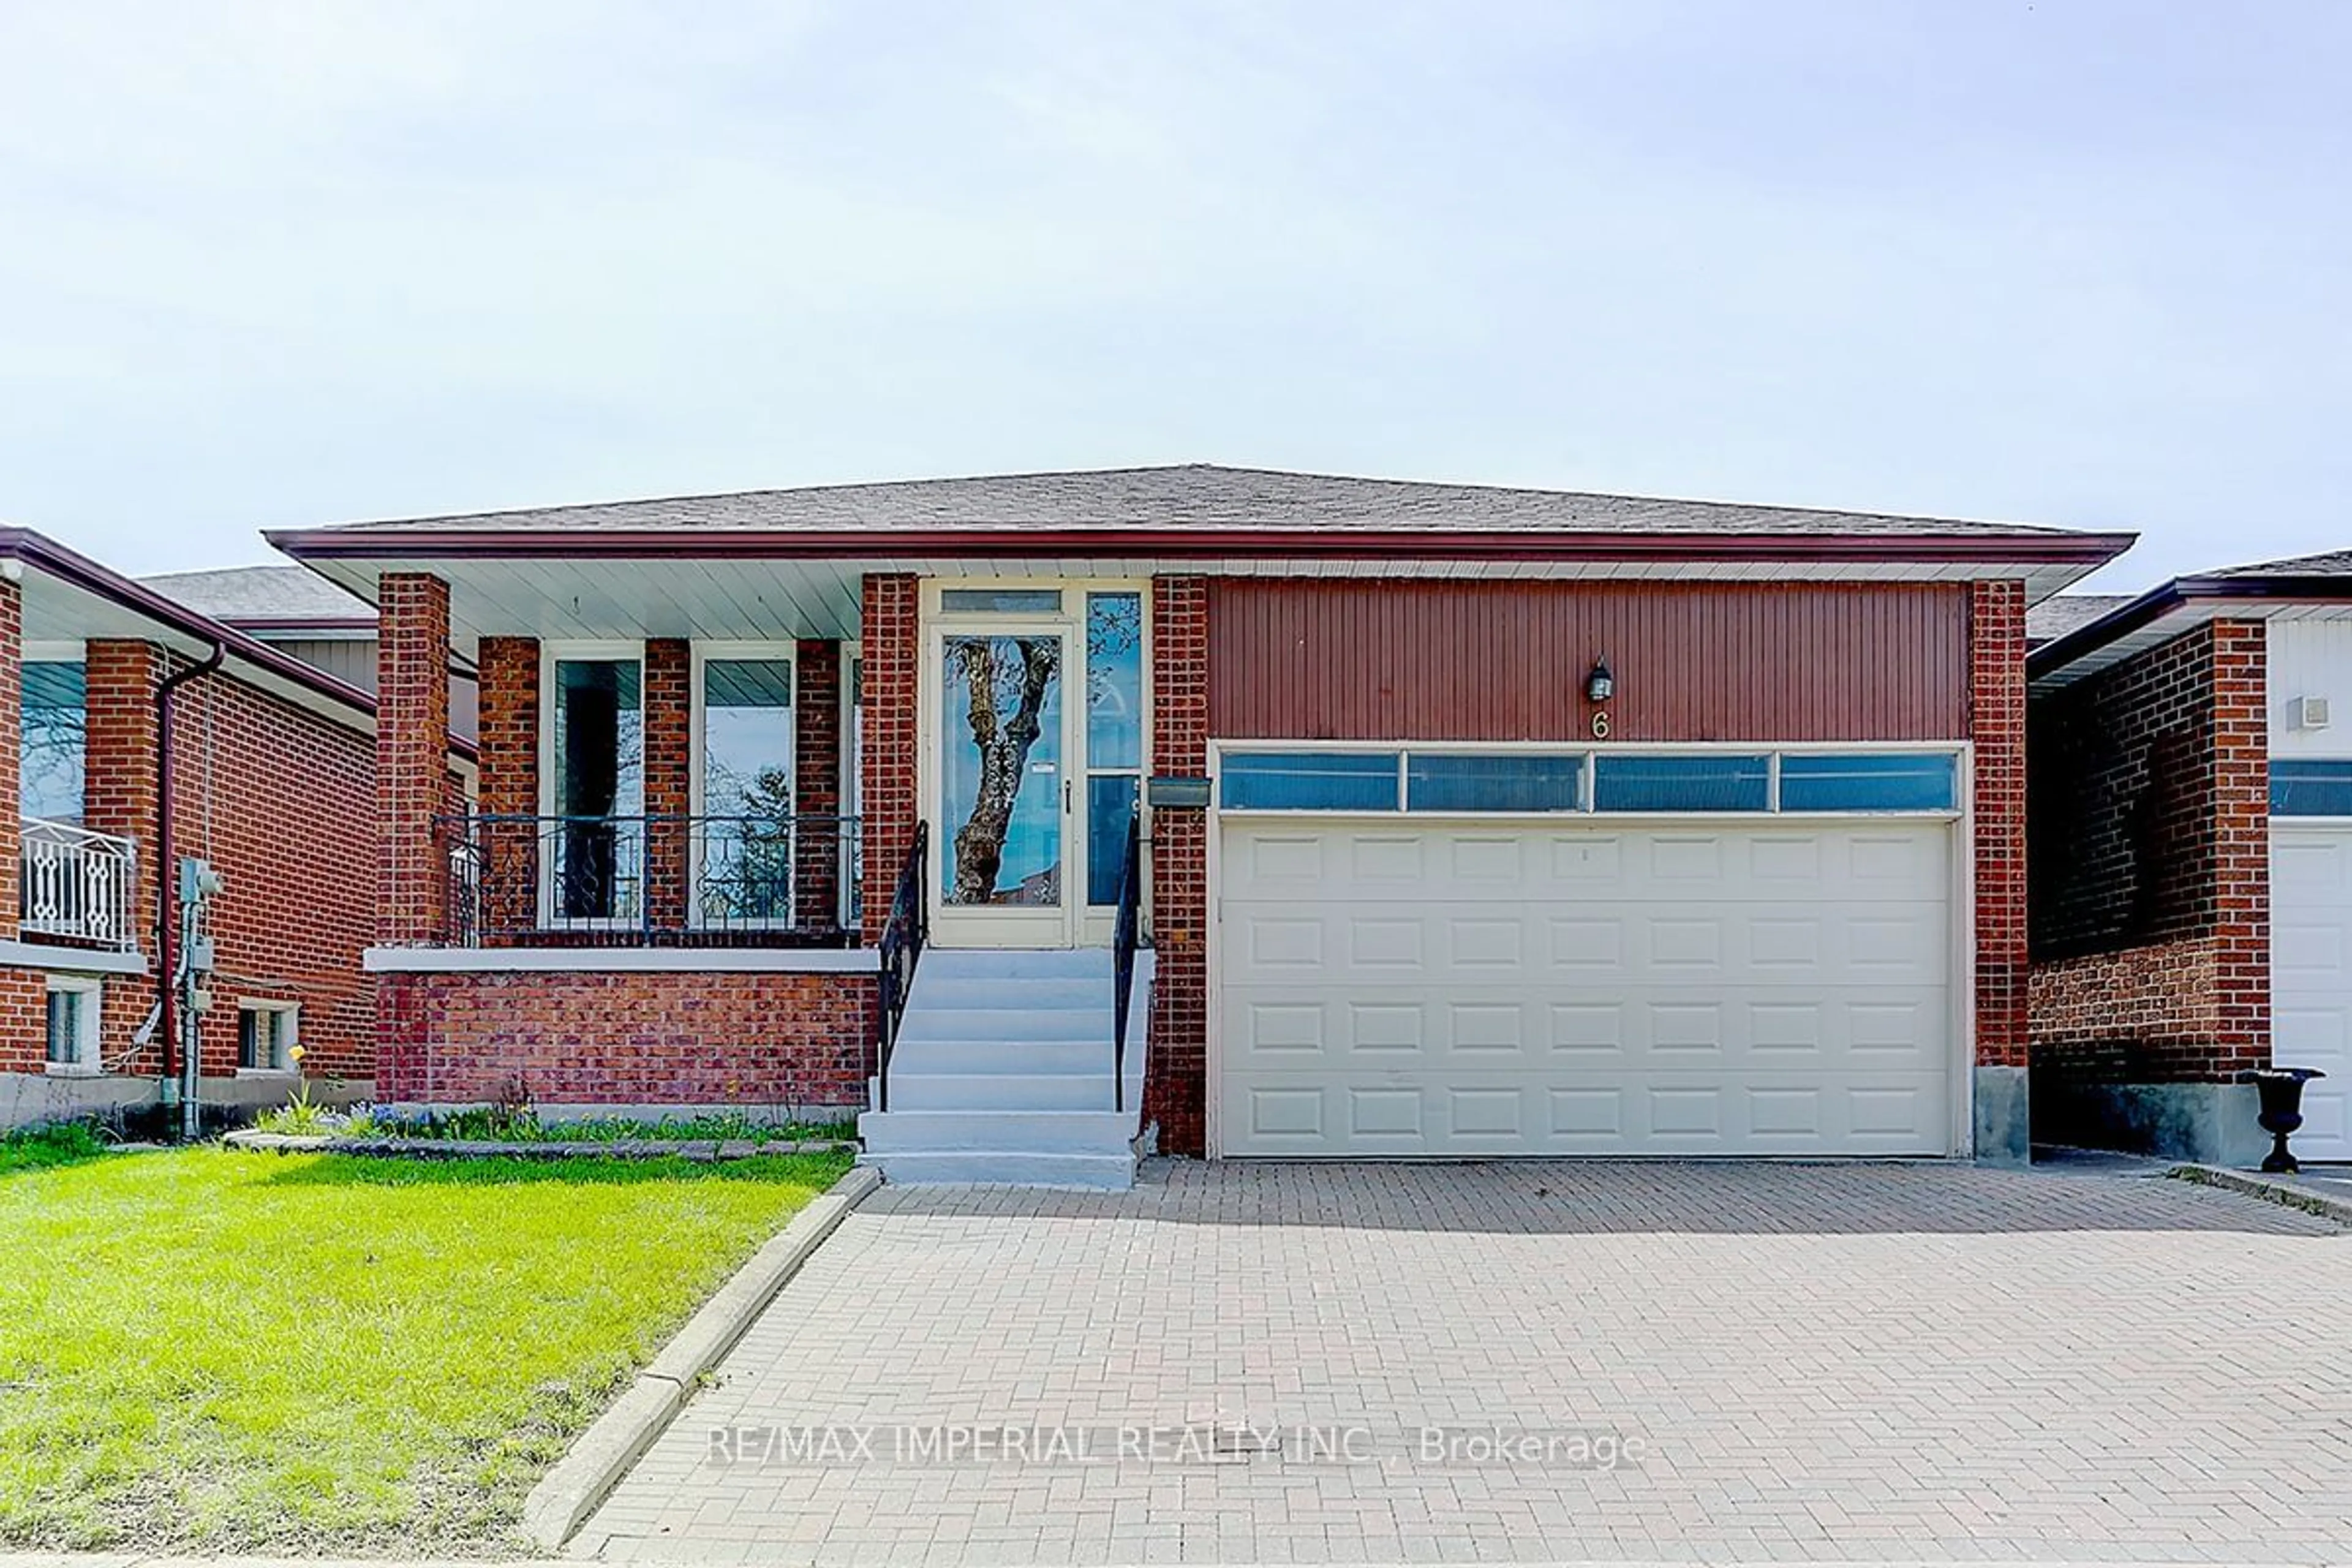 Home with brick exterior material for 6 Crayford Dr, Toronto Ontario M1W 3B6